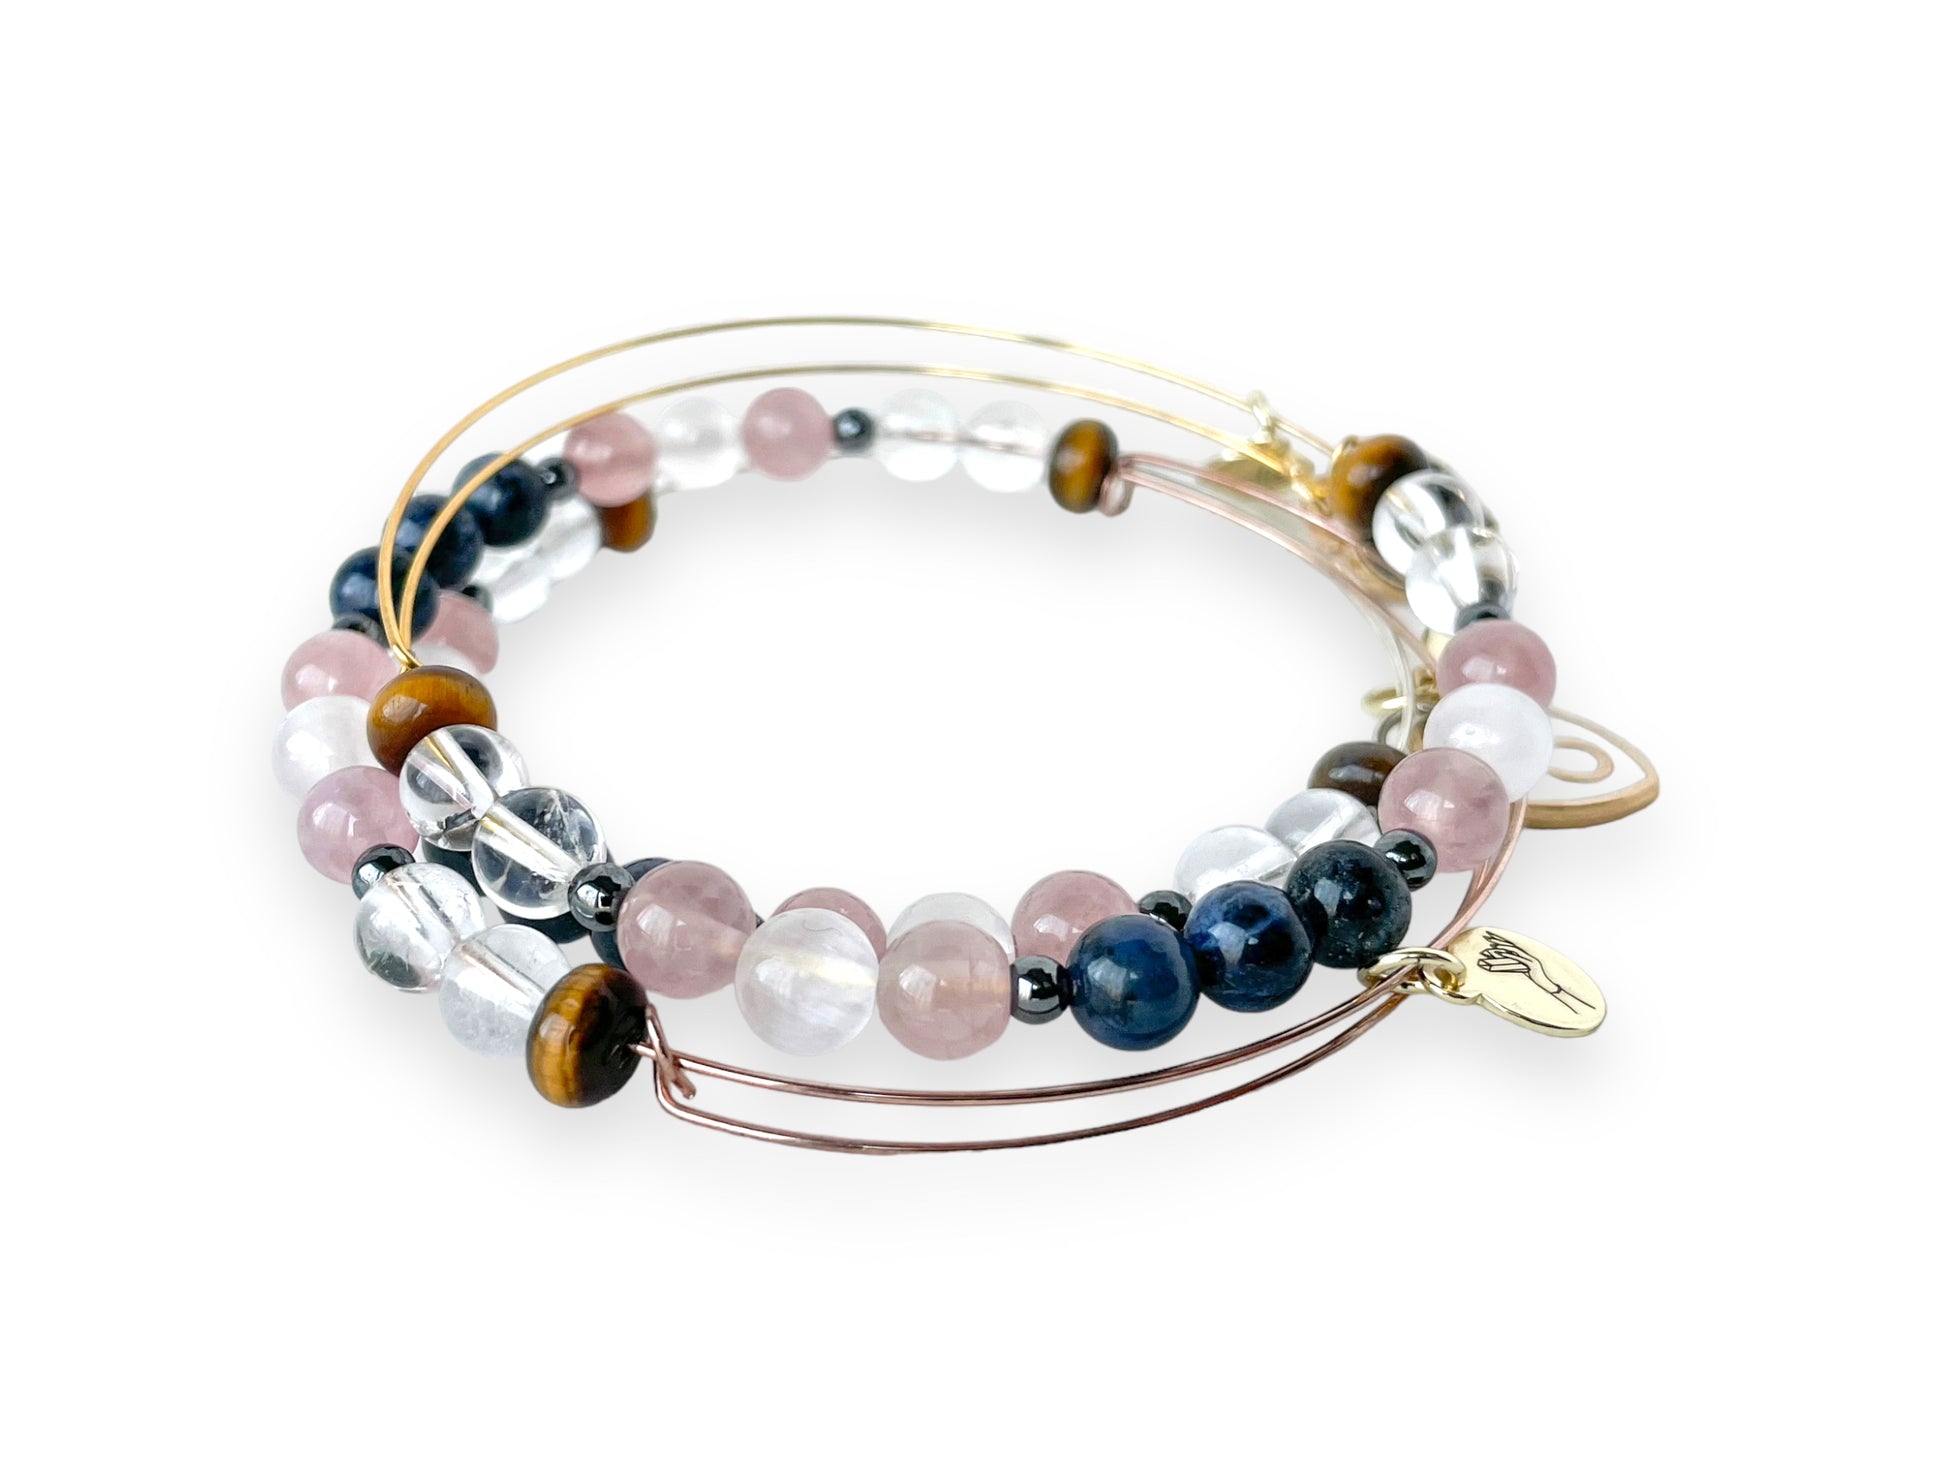 Stack of Taurus Bracelets, illustrating the blend for empowerment and style